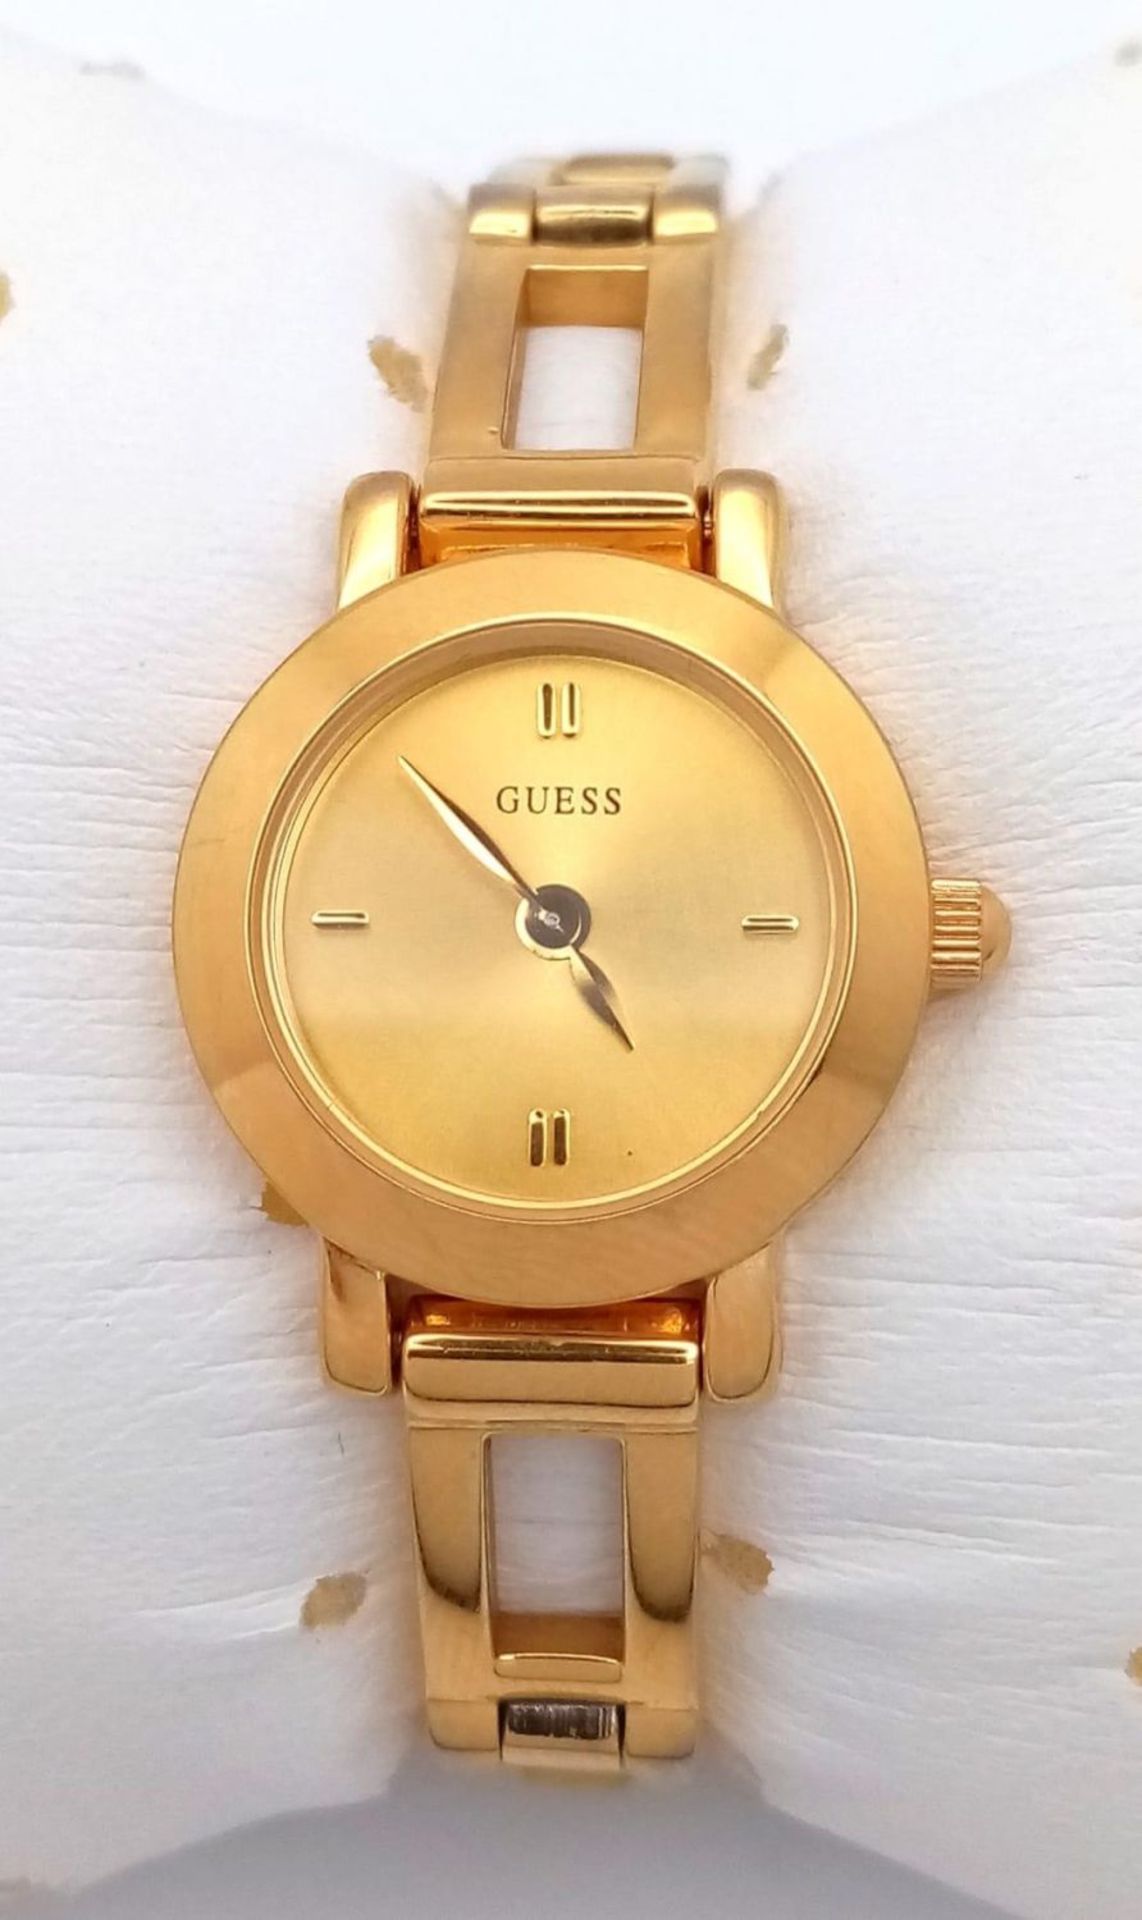 A Fashionable Gold Plated Guess Quartz Ladies Watch. Gilded bracelet and case - 20mm. Gilded dial.